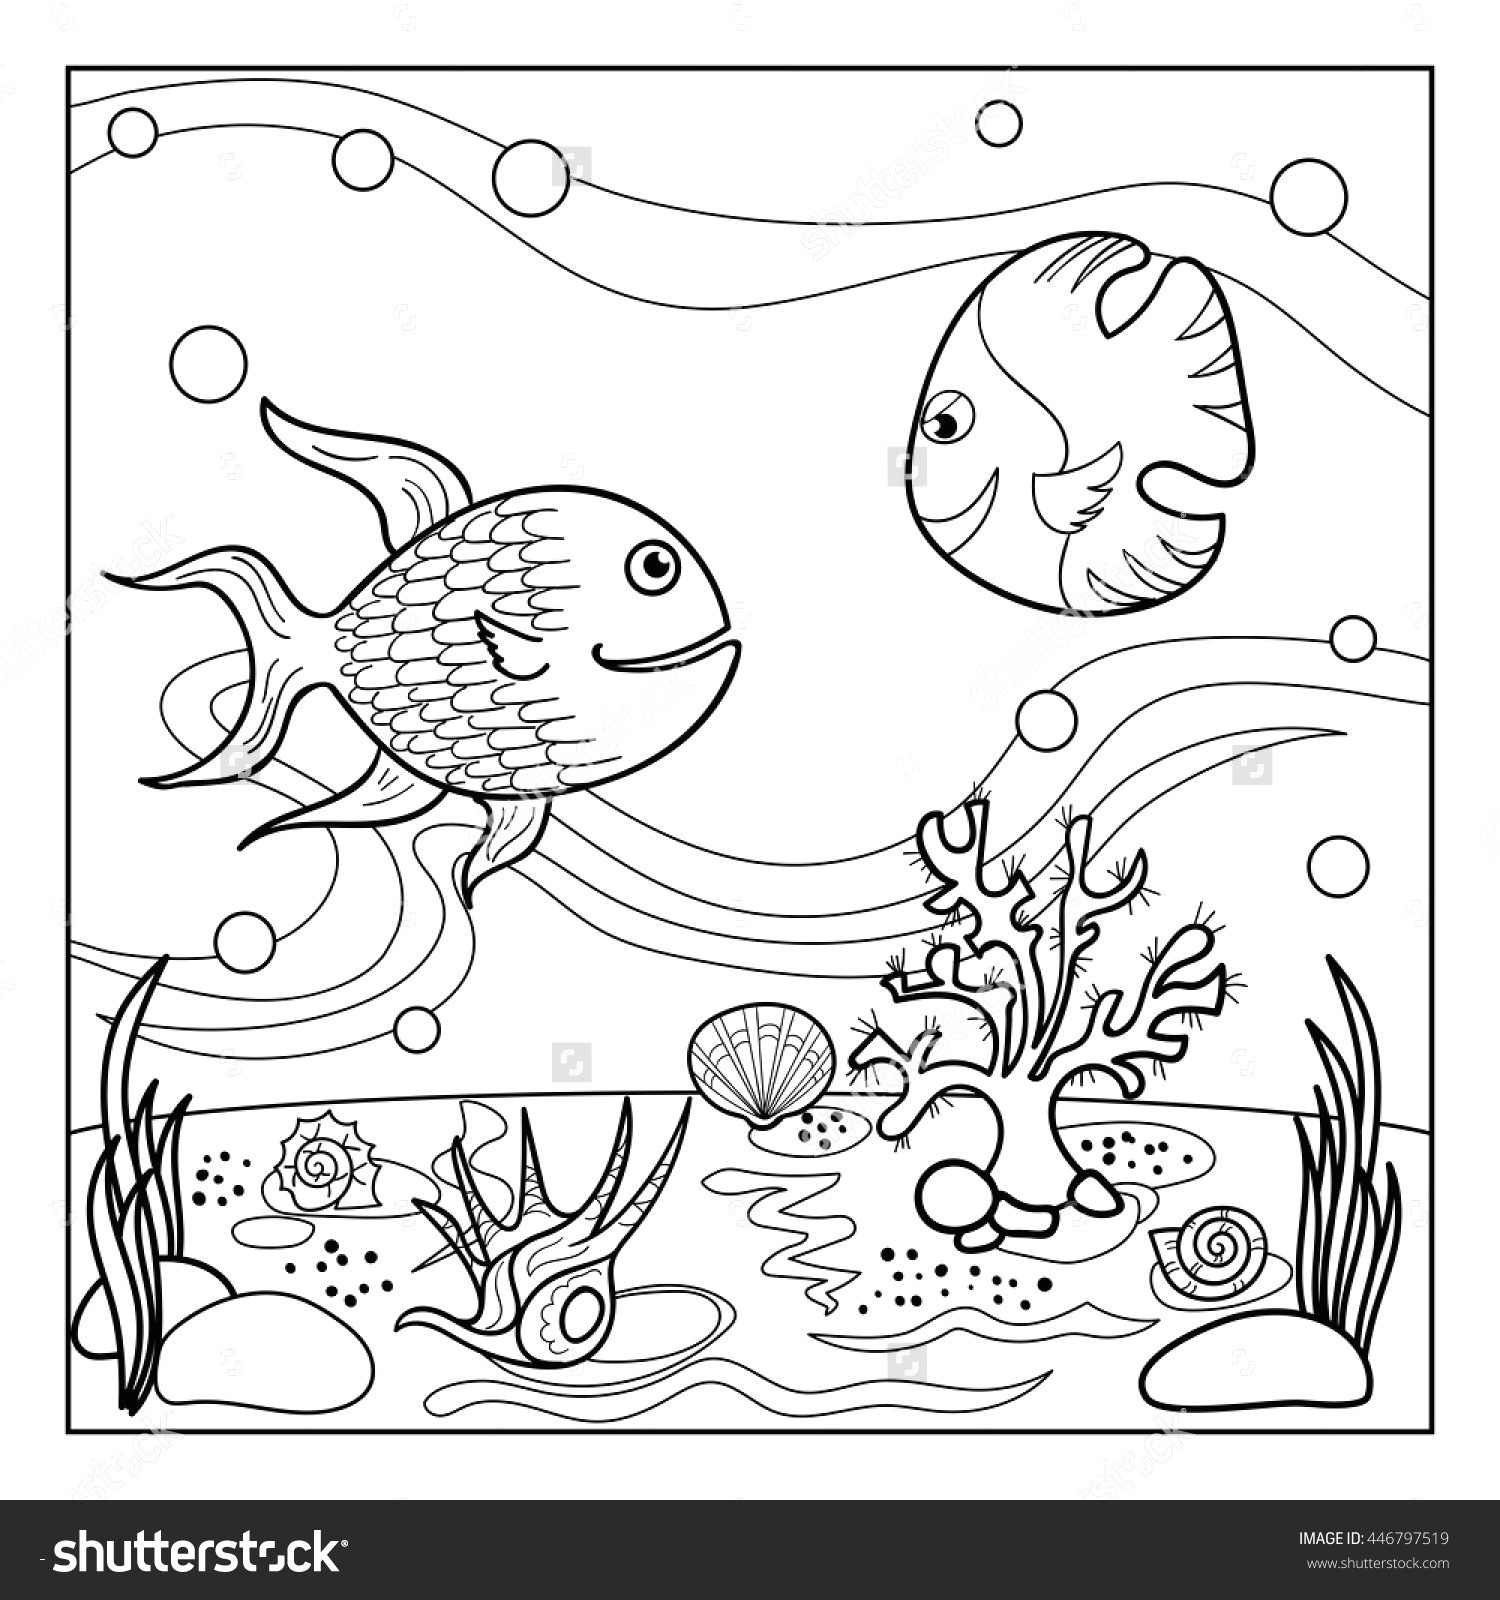 Drawing Of Eye Easy Easy to Draw Feather Feather Coloring Page Fresh Home Coloring Pages